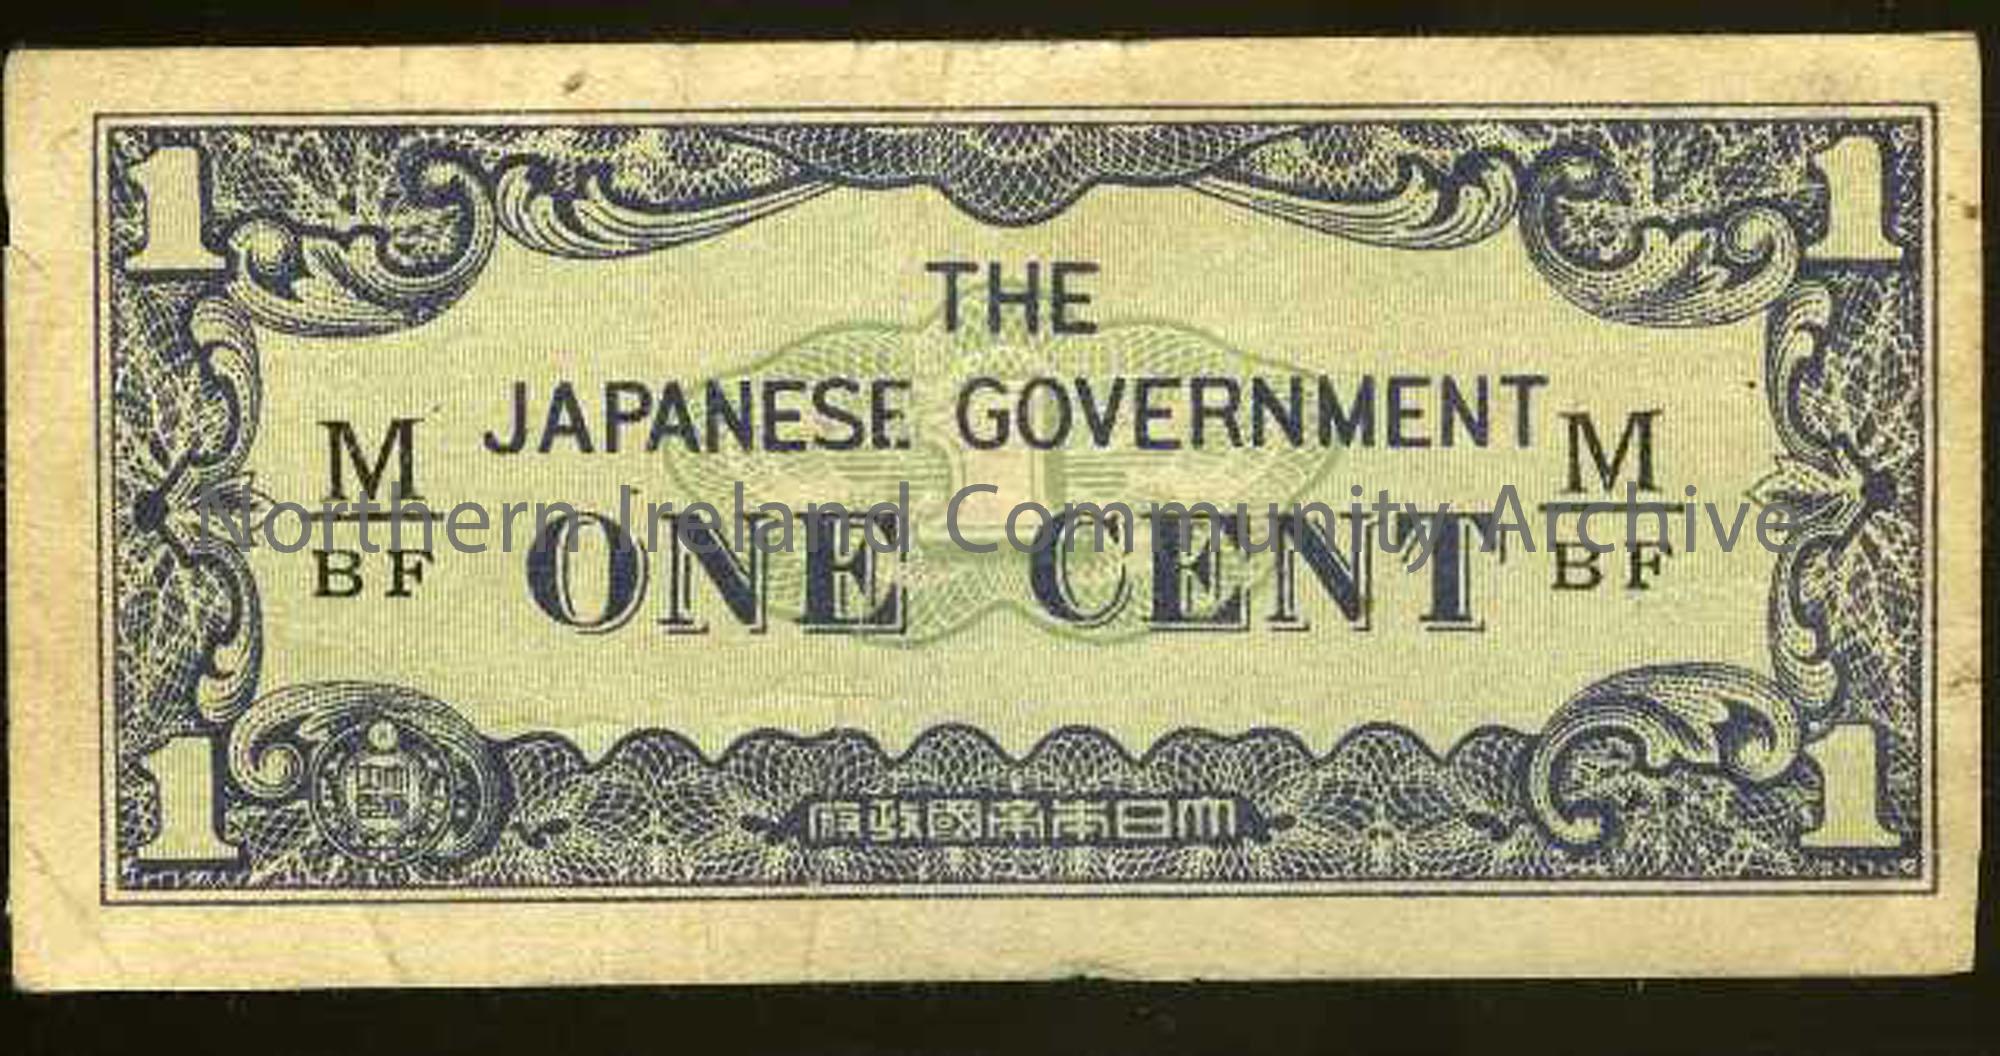 Japanese one cent note